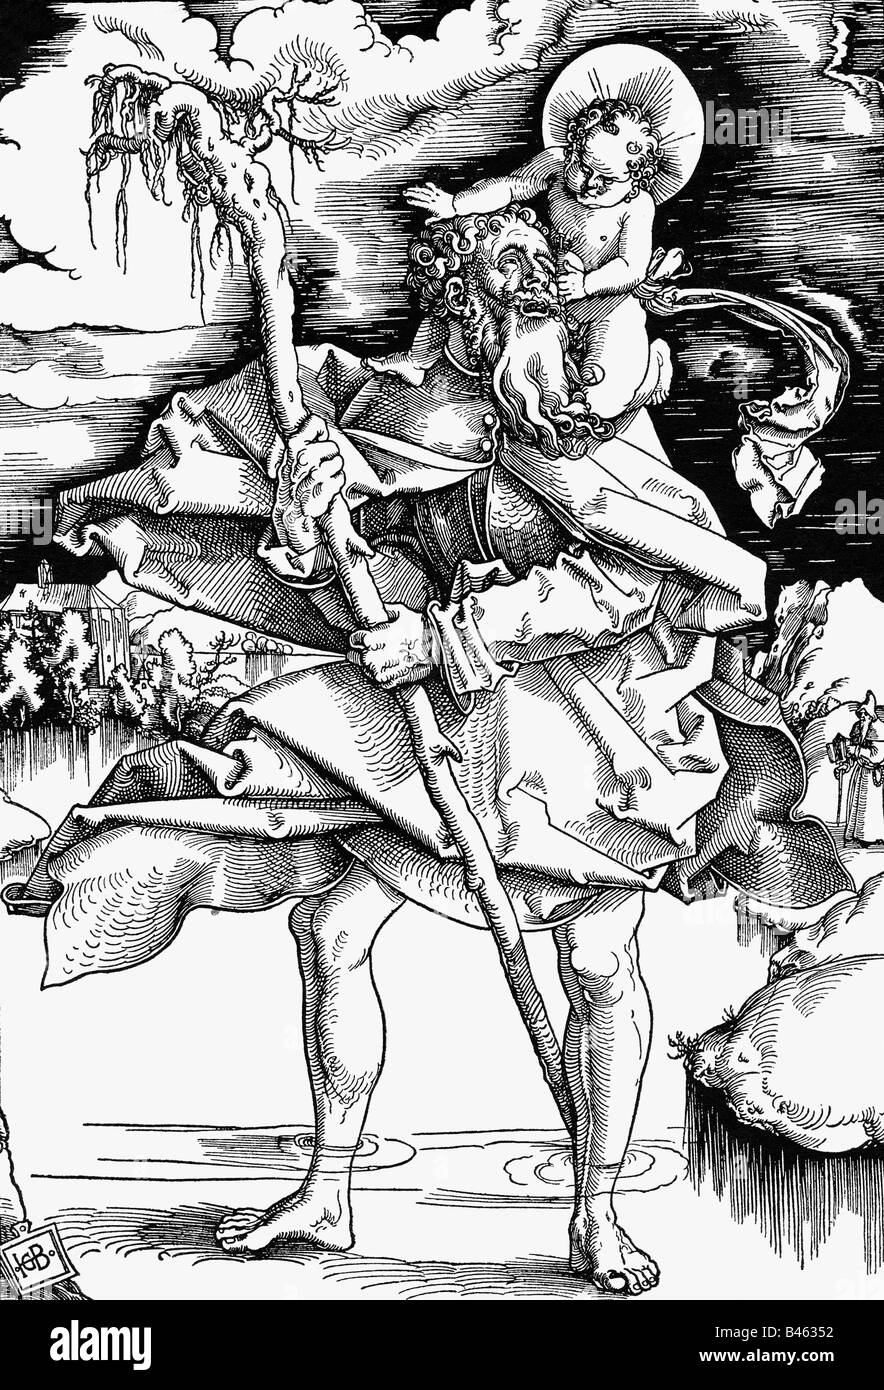 Christopher, + circa 250, saint, martyr, woodcut, by Hans Baldung Grien (1484 / 1485 - 1545), Germany, first half of the 16th century, Stock Photo